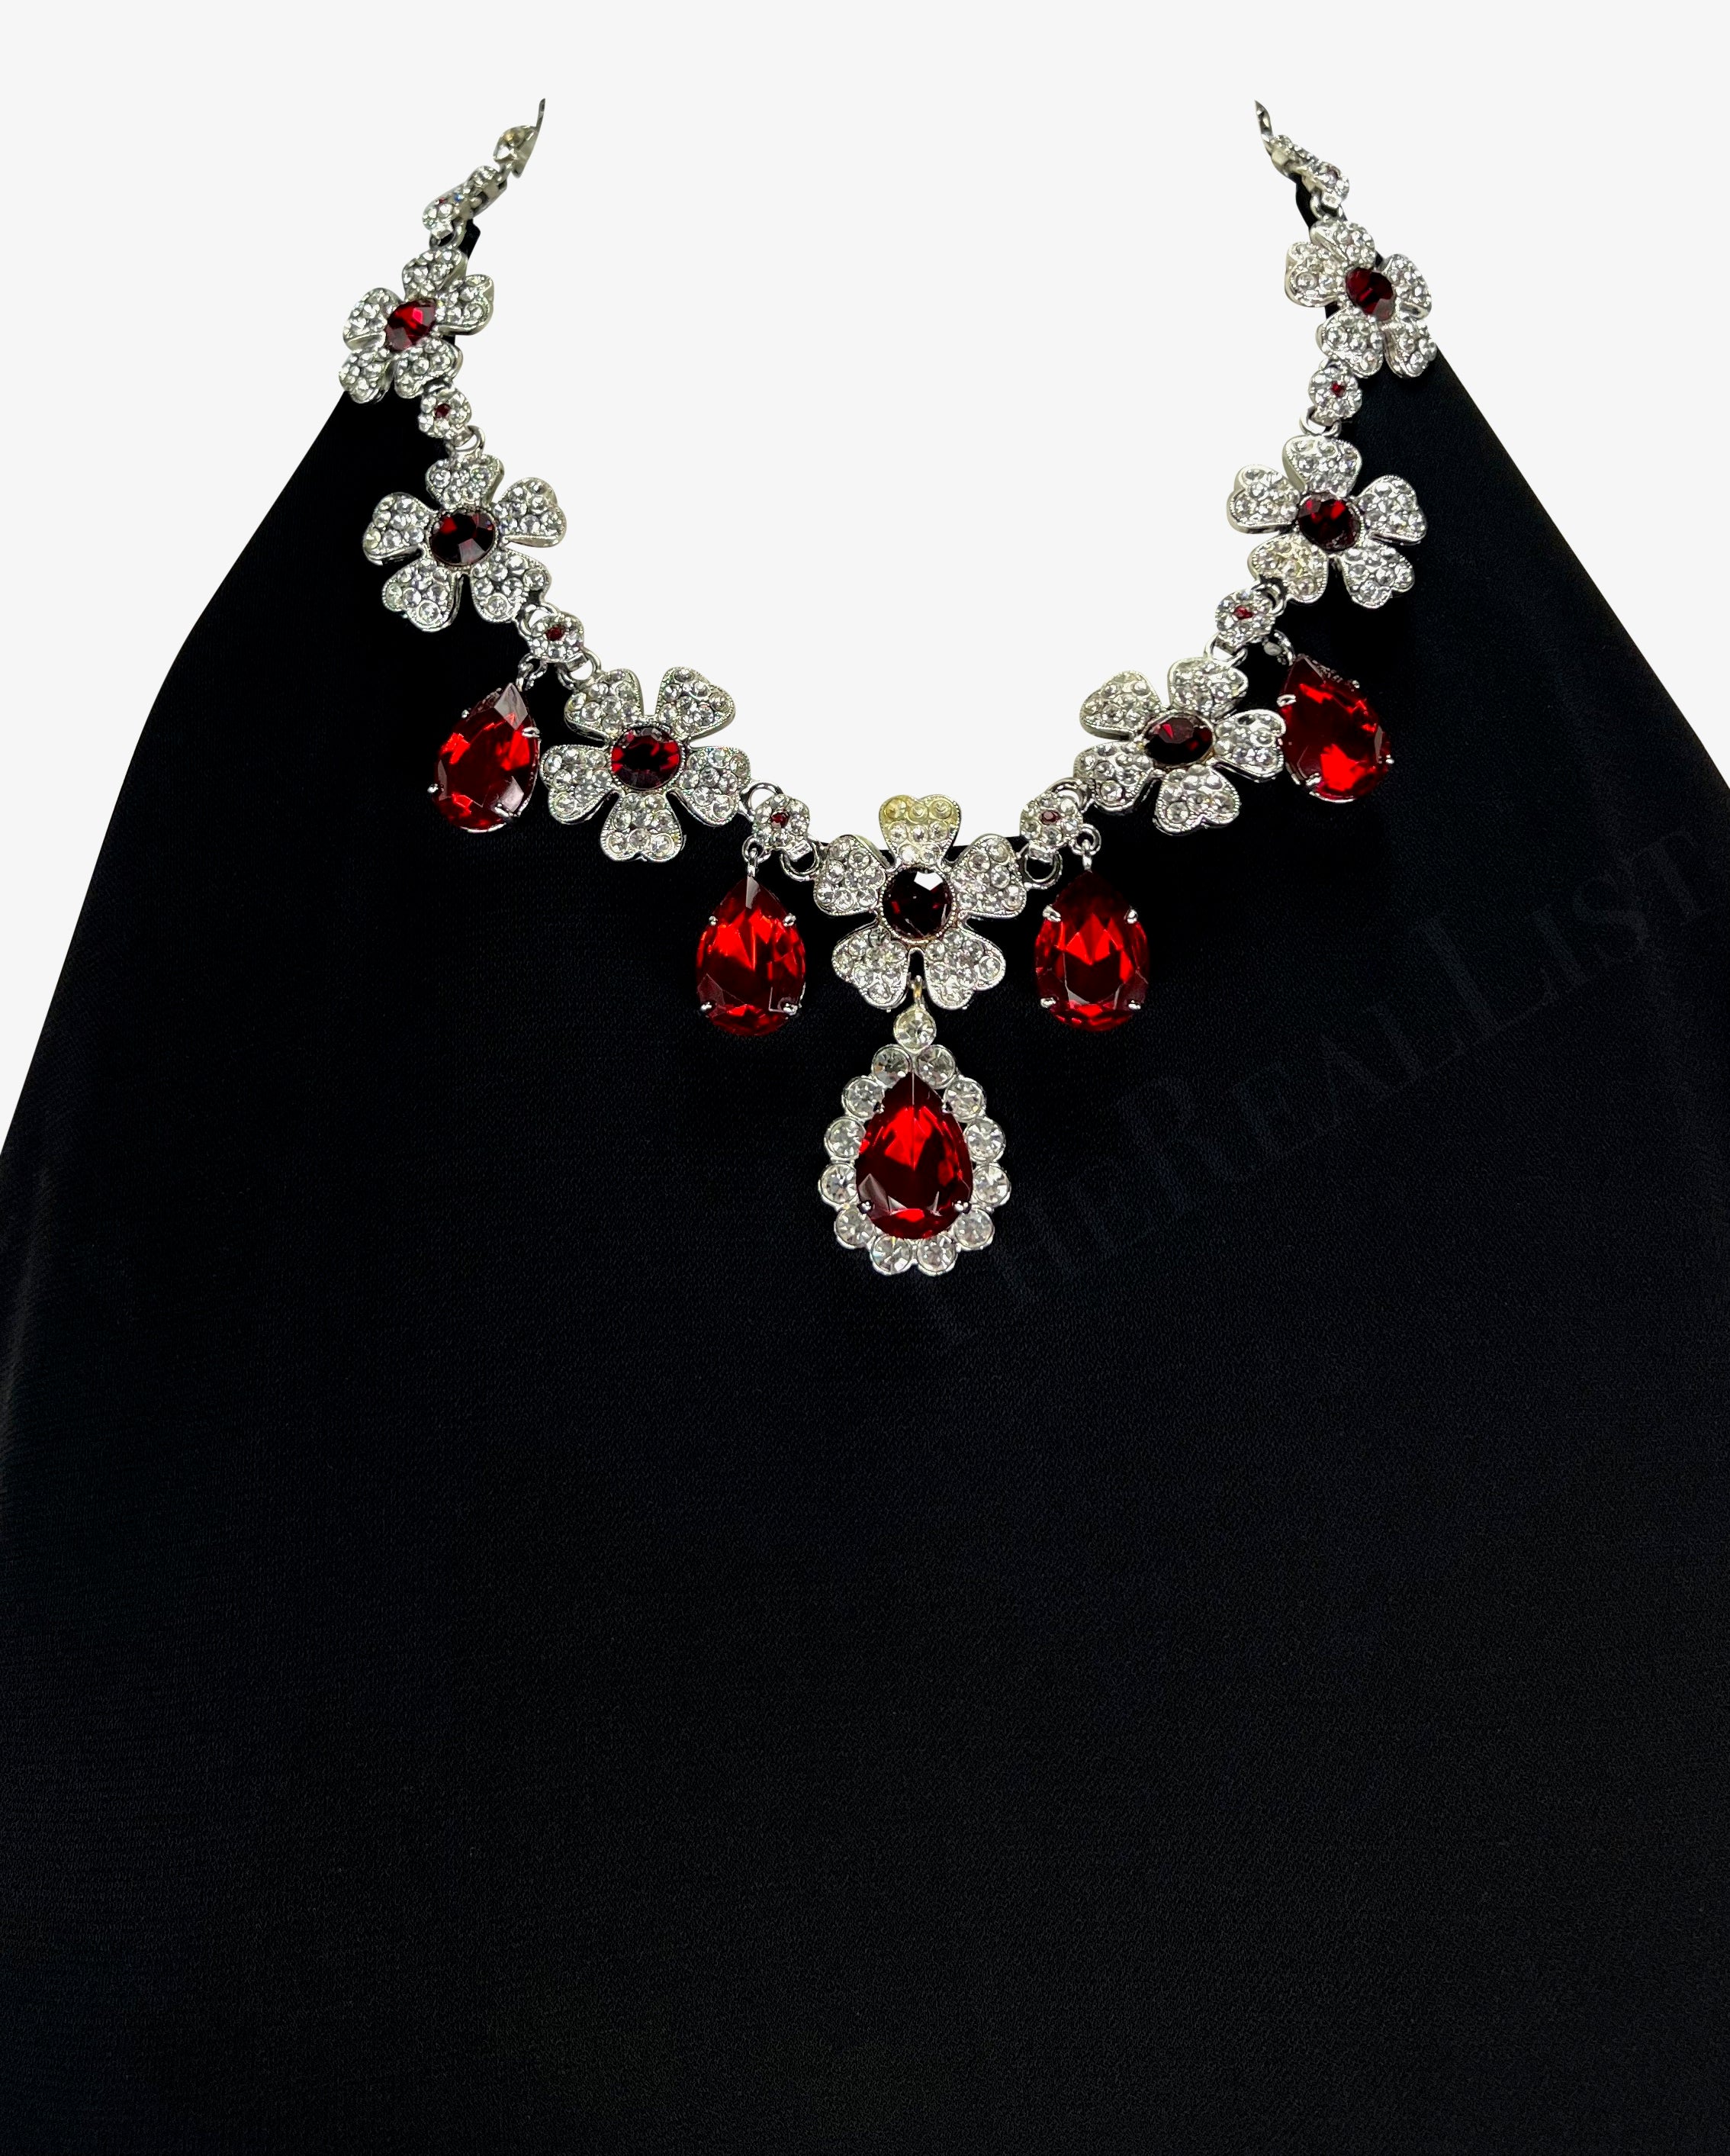 F/W 2001 Dolce & Gabbana Black Halterneck Jewel Necklace Midi Dress In Excellent Condition For Sale In West Hollywood, CA